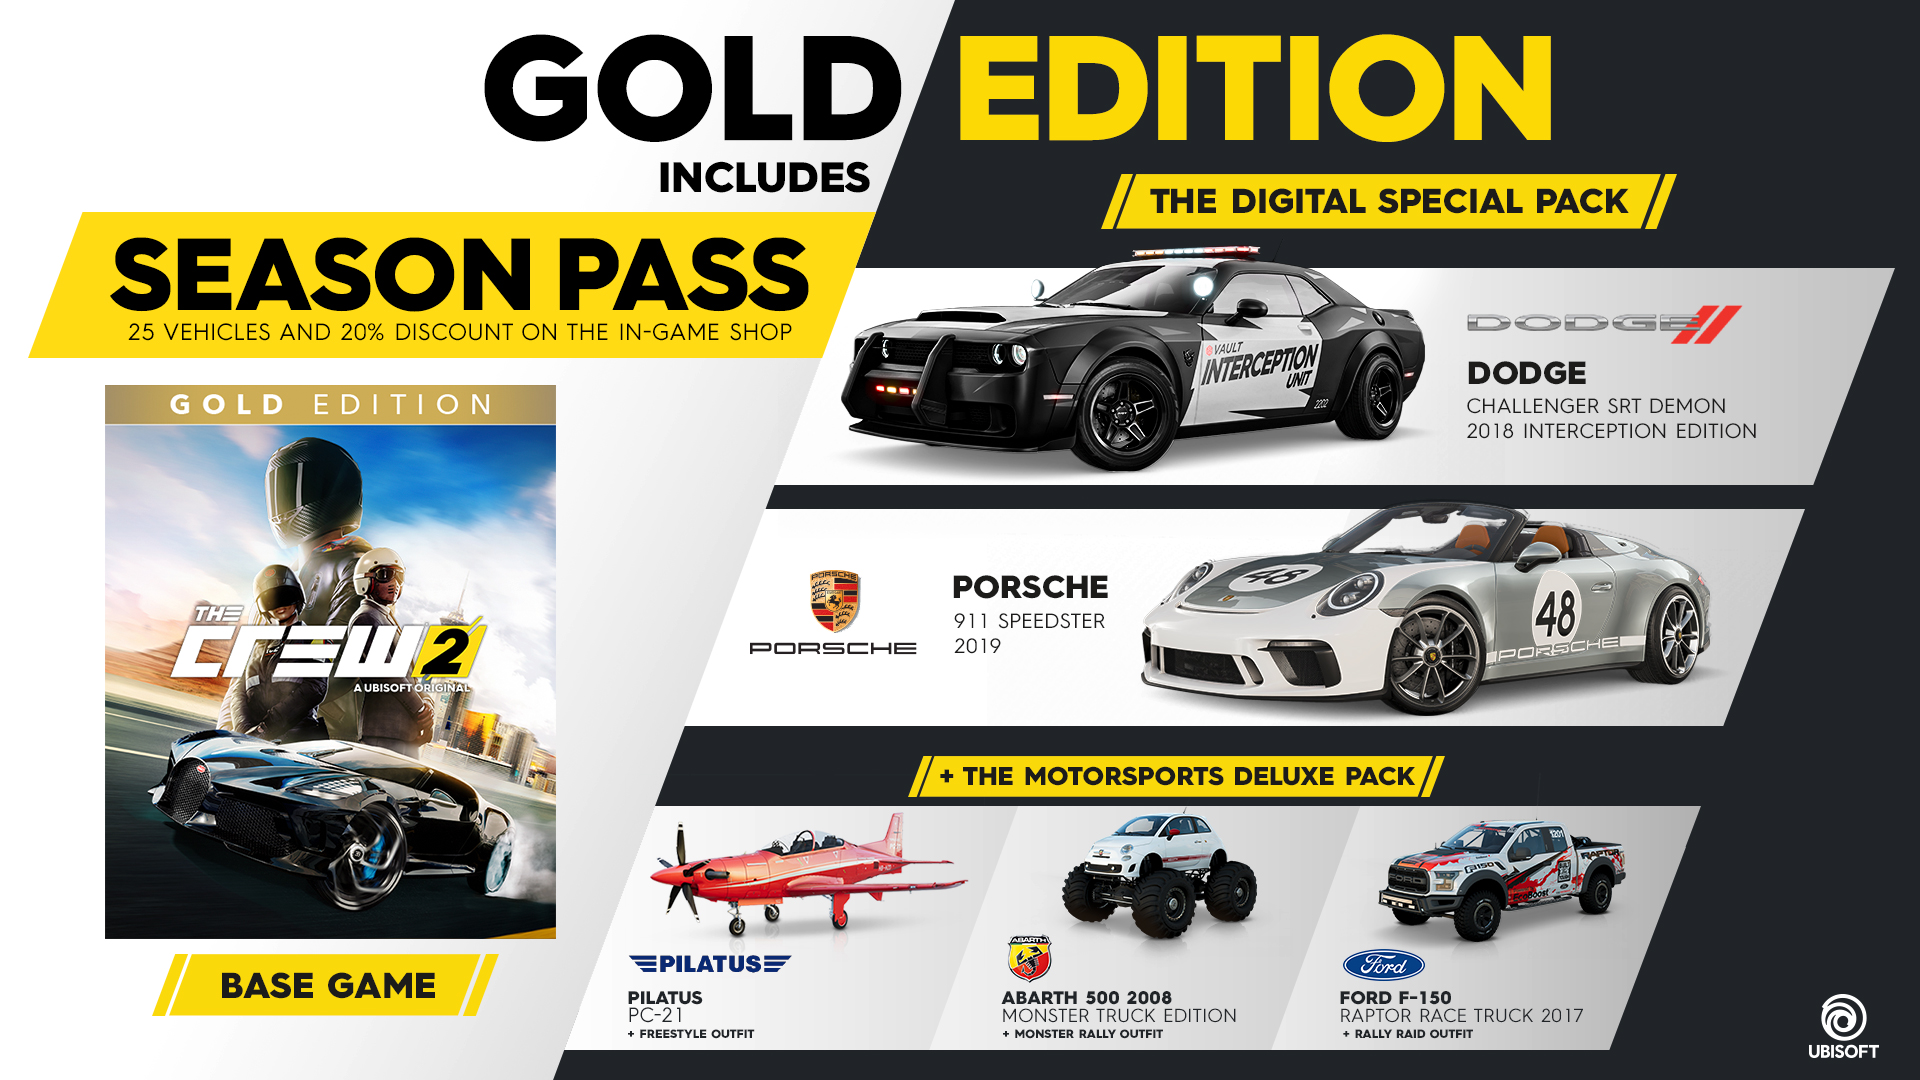 The Crew 2 - Digital Standard Edition (Simplified Chinese, English, Korean,  Traditional Chinese)